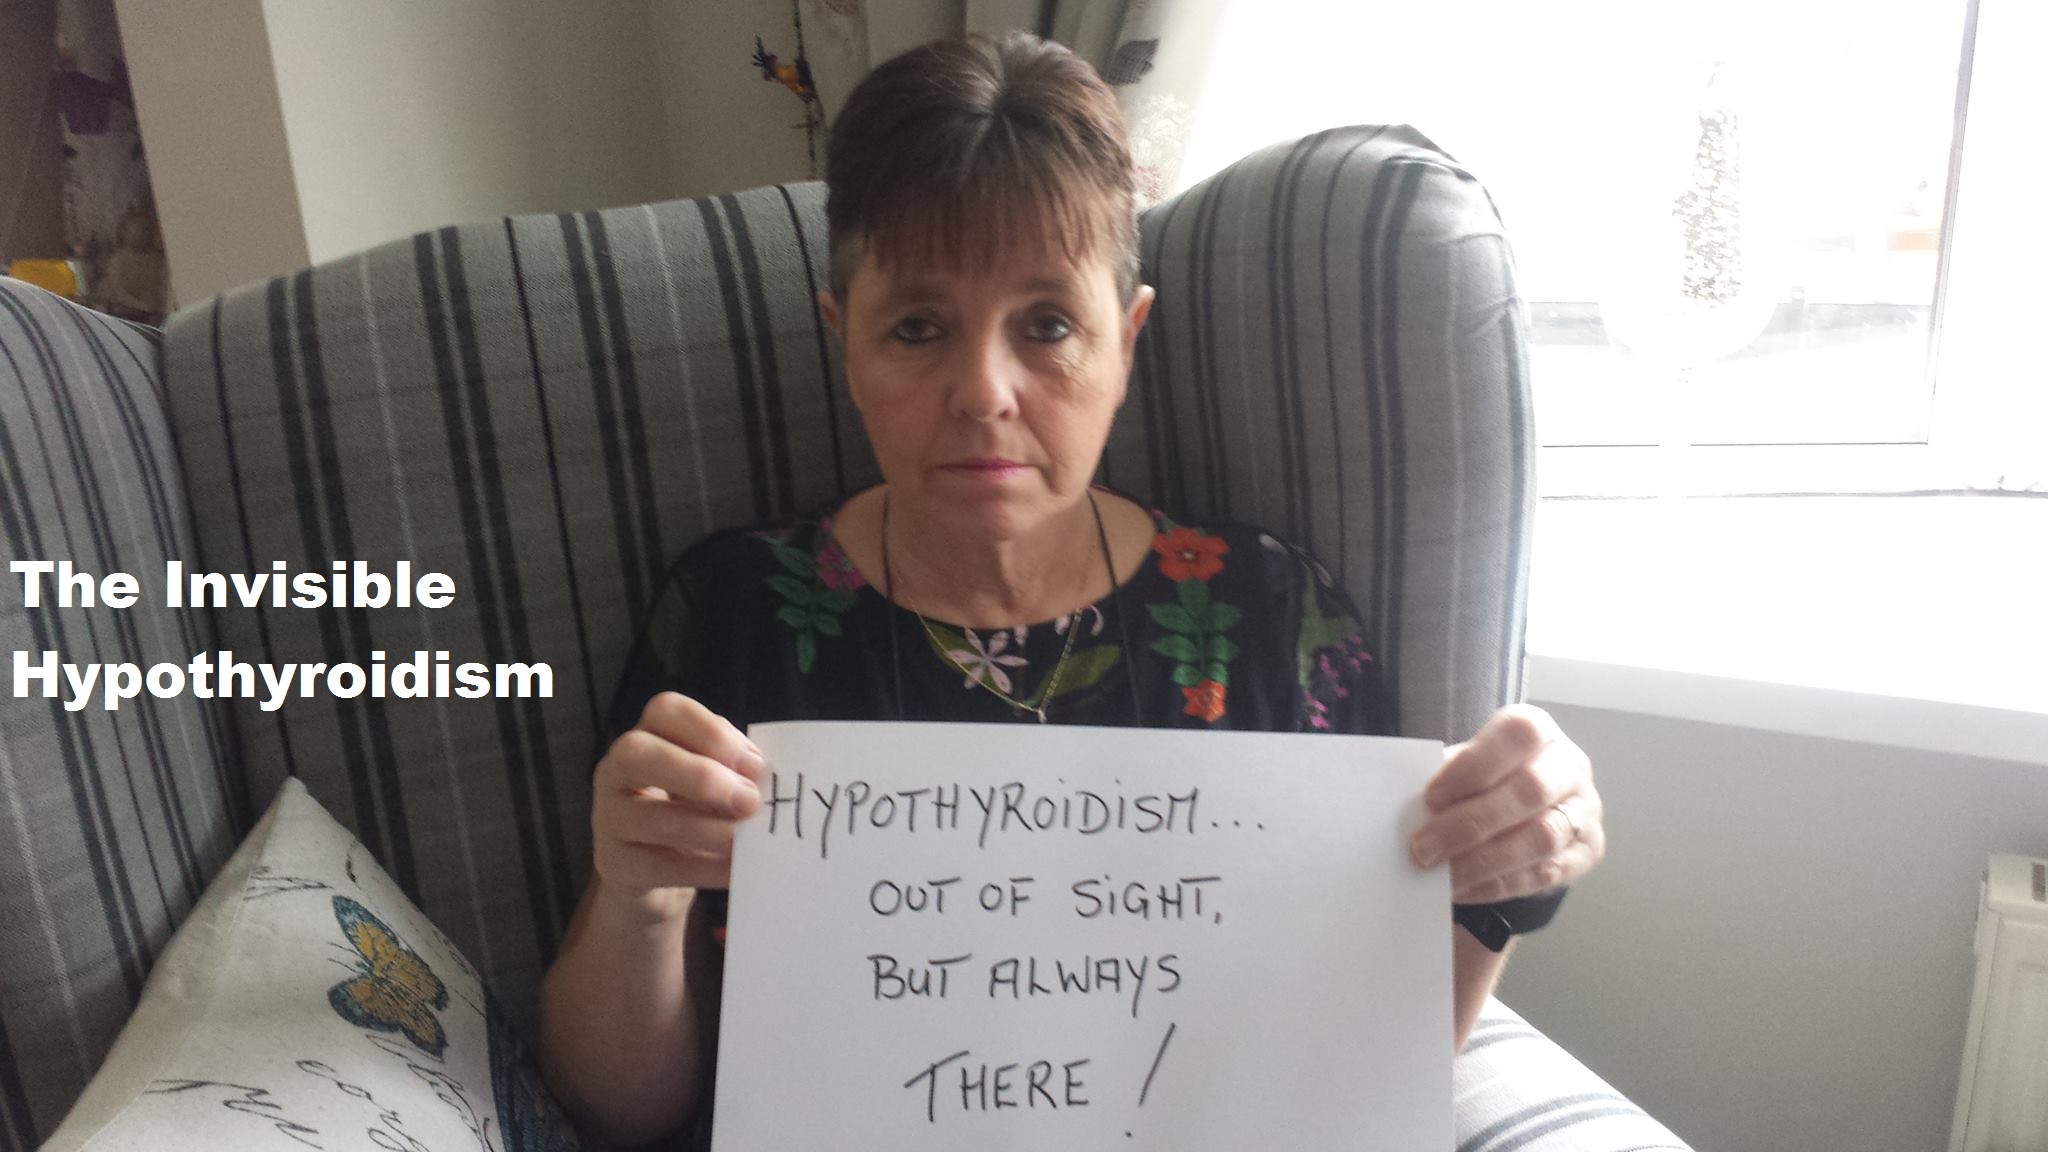 A Thyroid Patient holding a sign saying 'Hypothyroidism... Out of sight, but always there!'